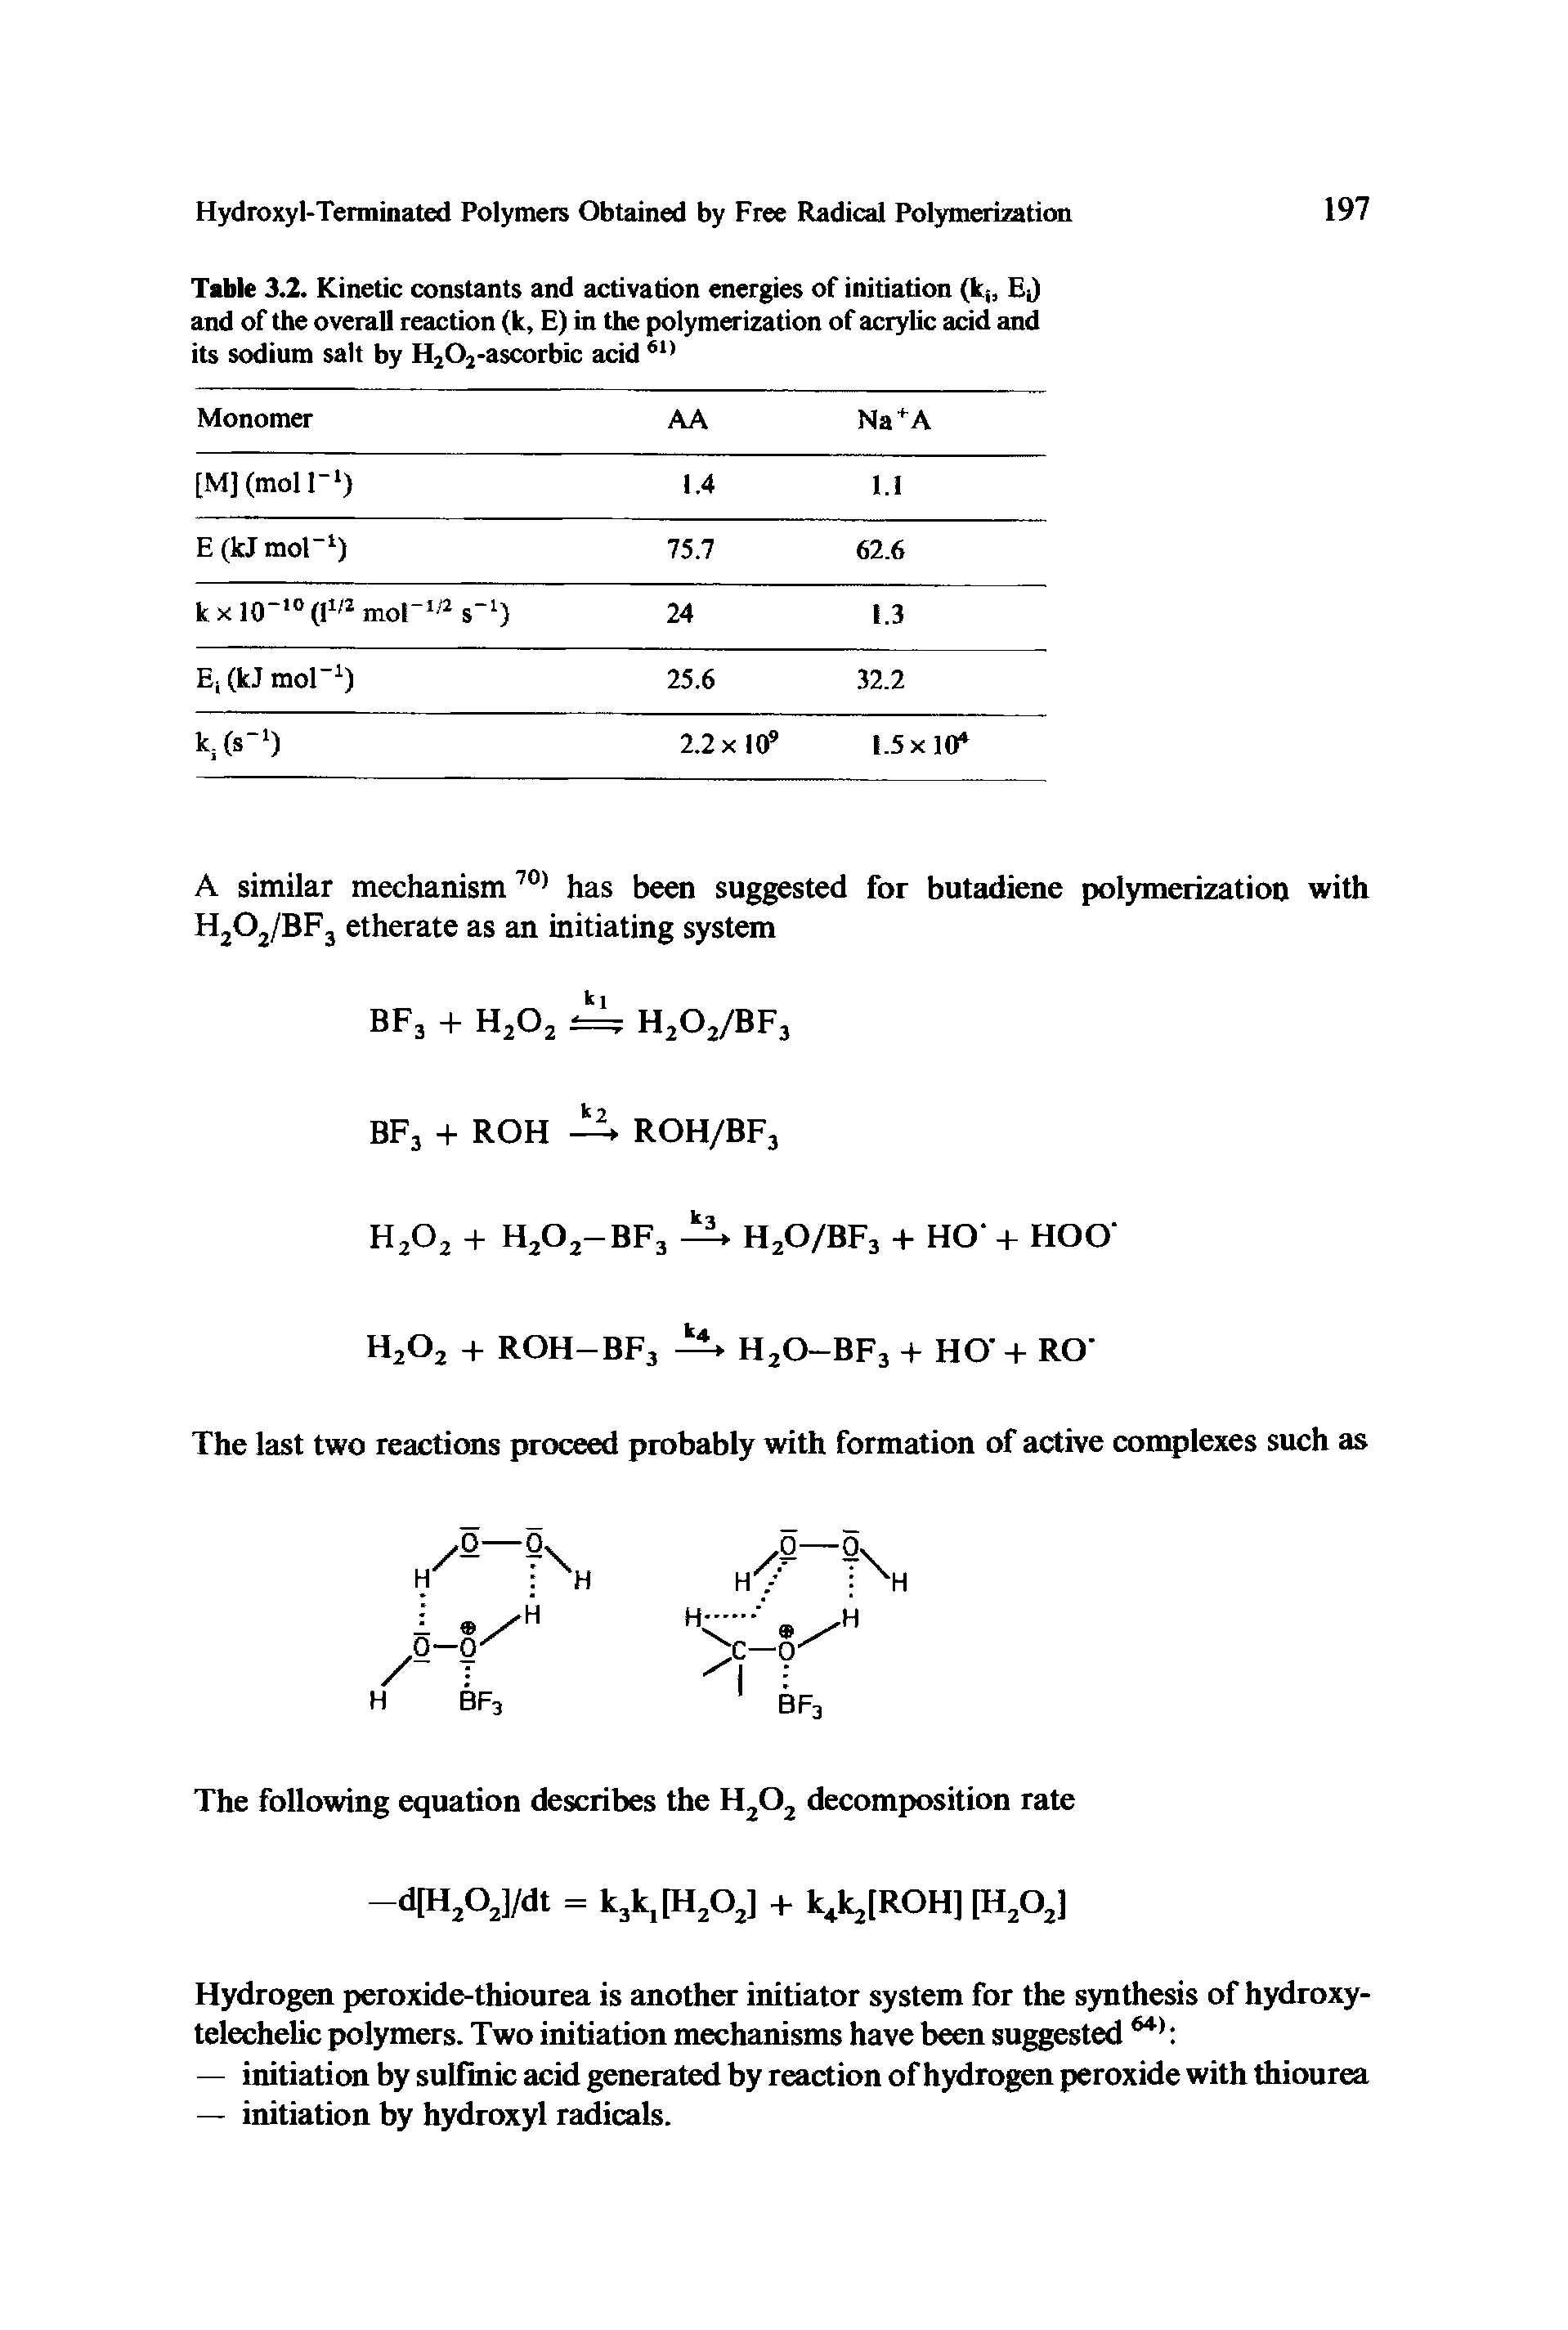 Table 3.2. Kinetic constants and activation energies of initiation (kjt EJ and of the overall reaction (k, E) in the polymerization of acrylic acid and its sodium salt by H202-ascorbic acid 61)...